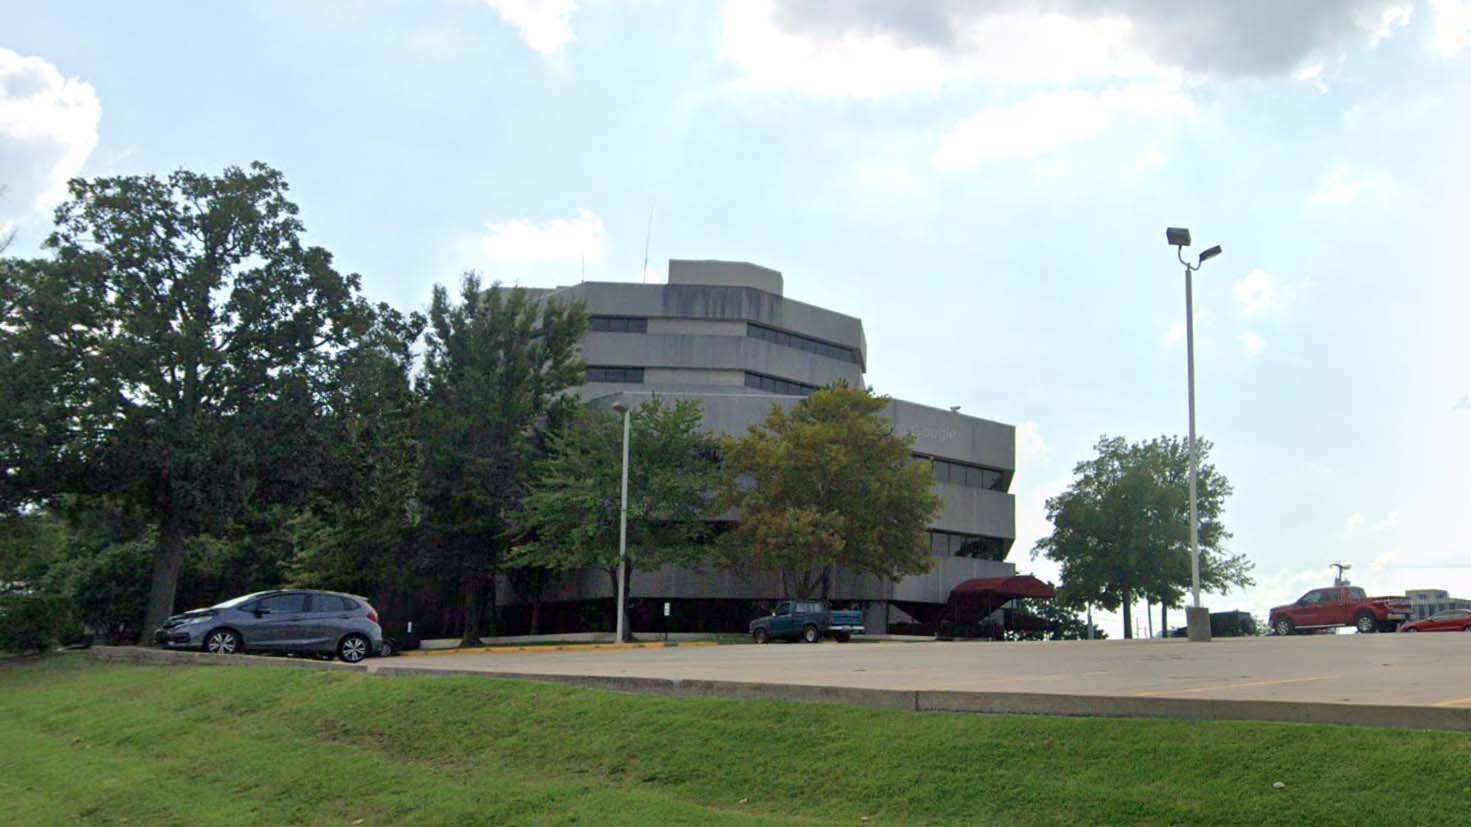 The Arclight Group in Tulsa